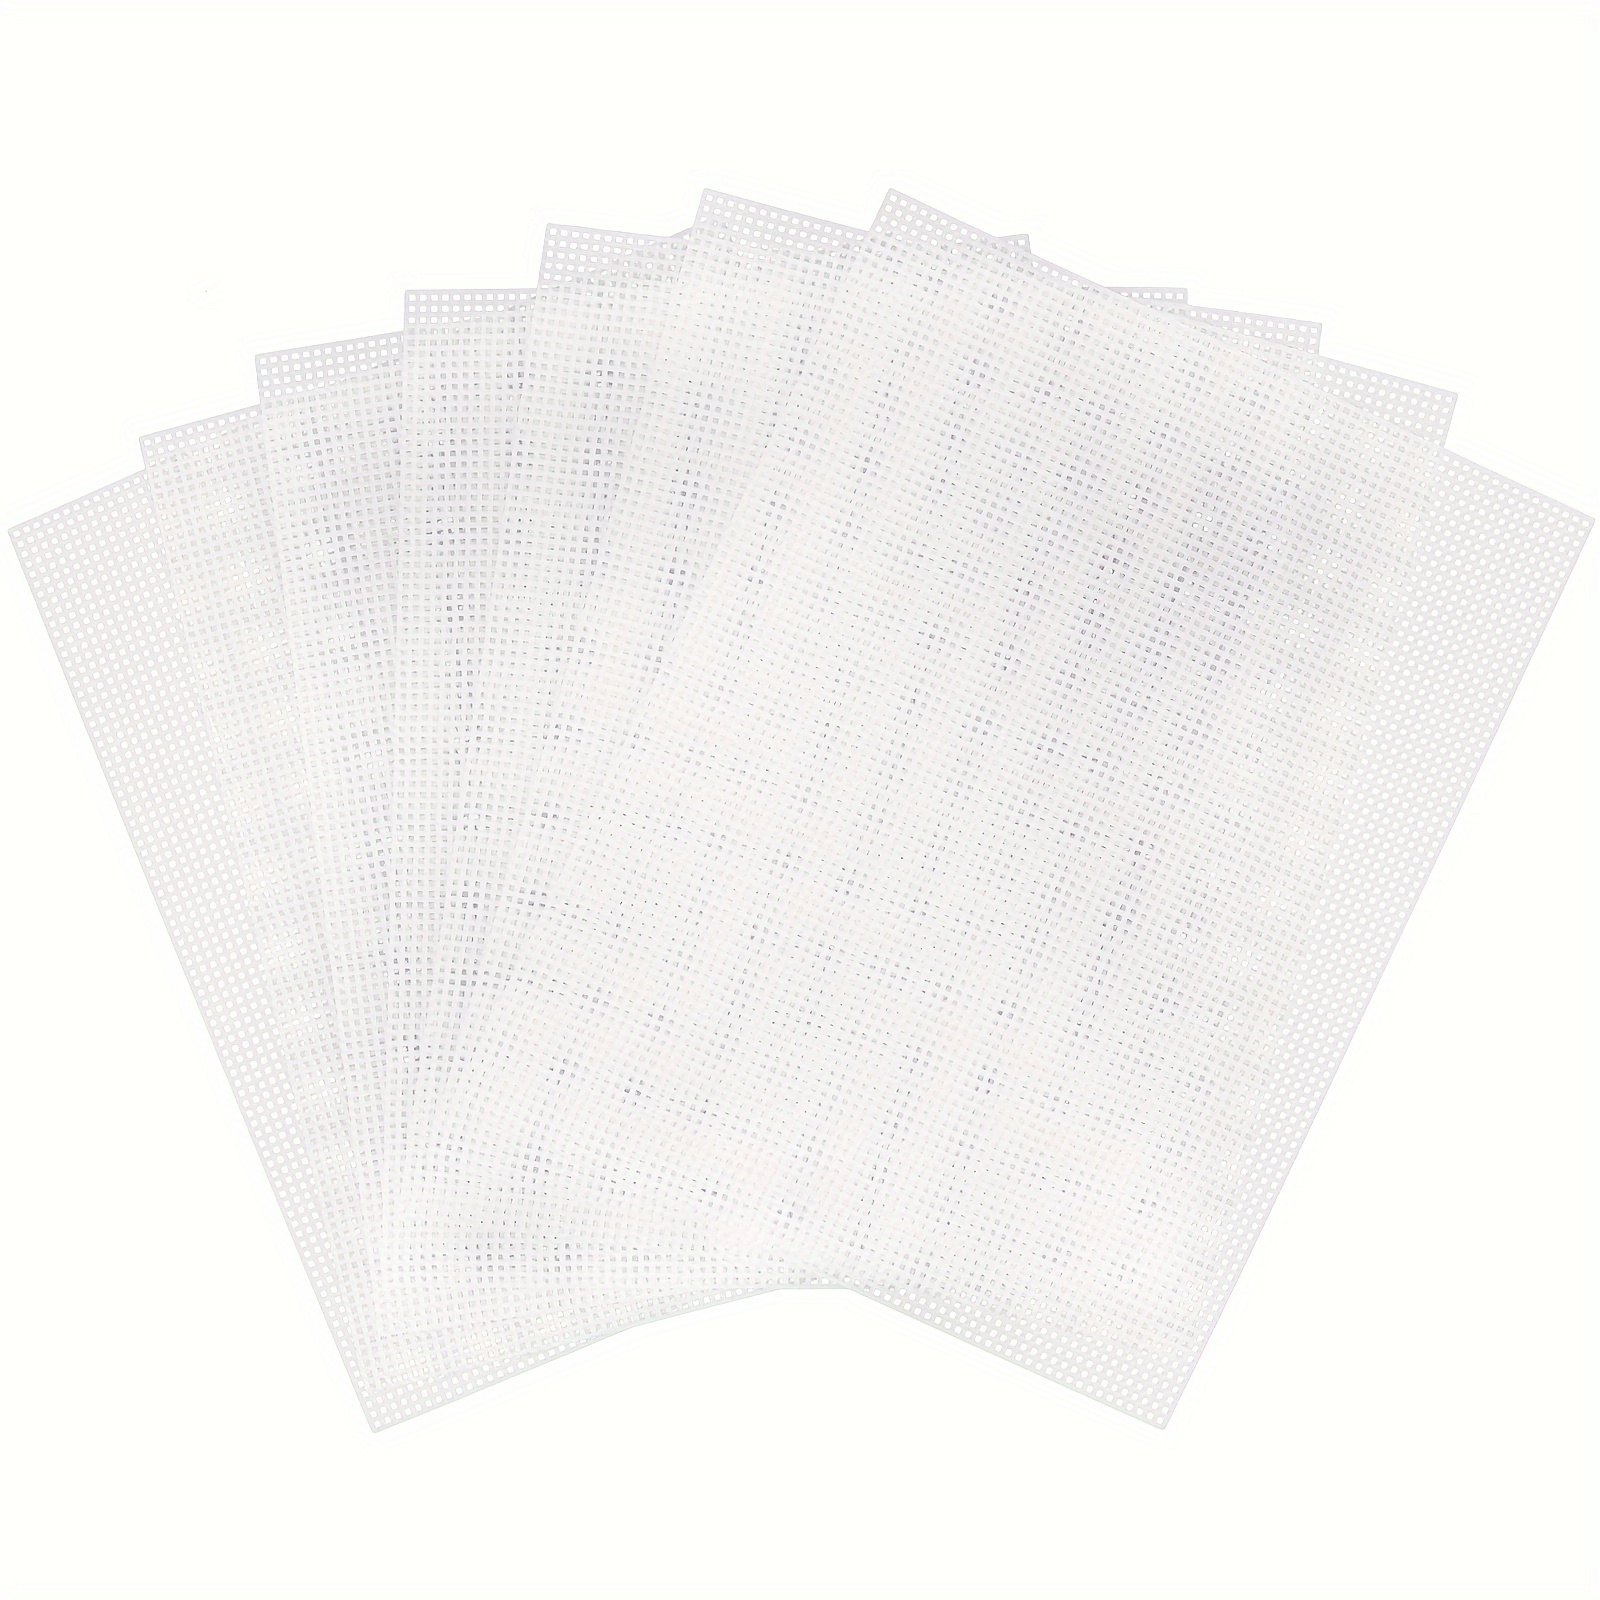 

3/7 Pieces Plastic Canvas, 3/7 Count plastic Mesh, 10.5 X 13.5 Inch Plastic Canvas Sheets, Plastic Mesh Sheet, Eye Mesh For Embroidery, Knit Crochet, Diy Handicraft, Dividers